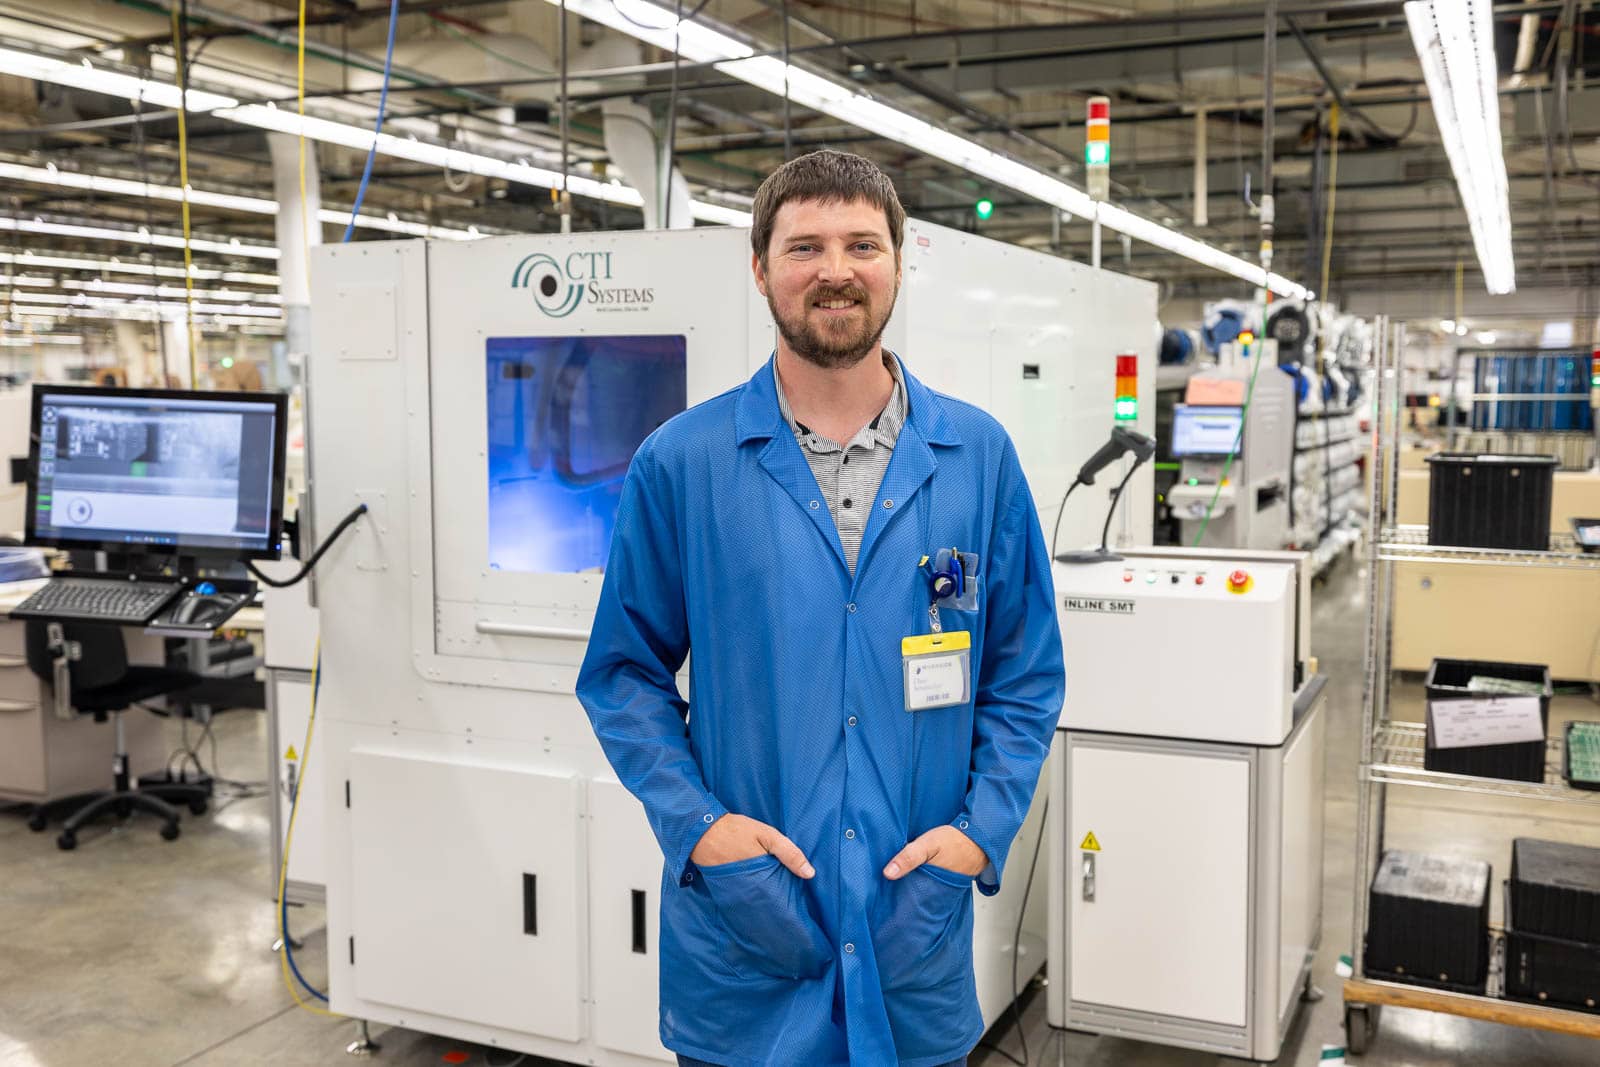 A RIS engineer stands in front of a laser etching machine on the production floor.